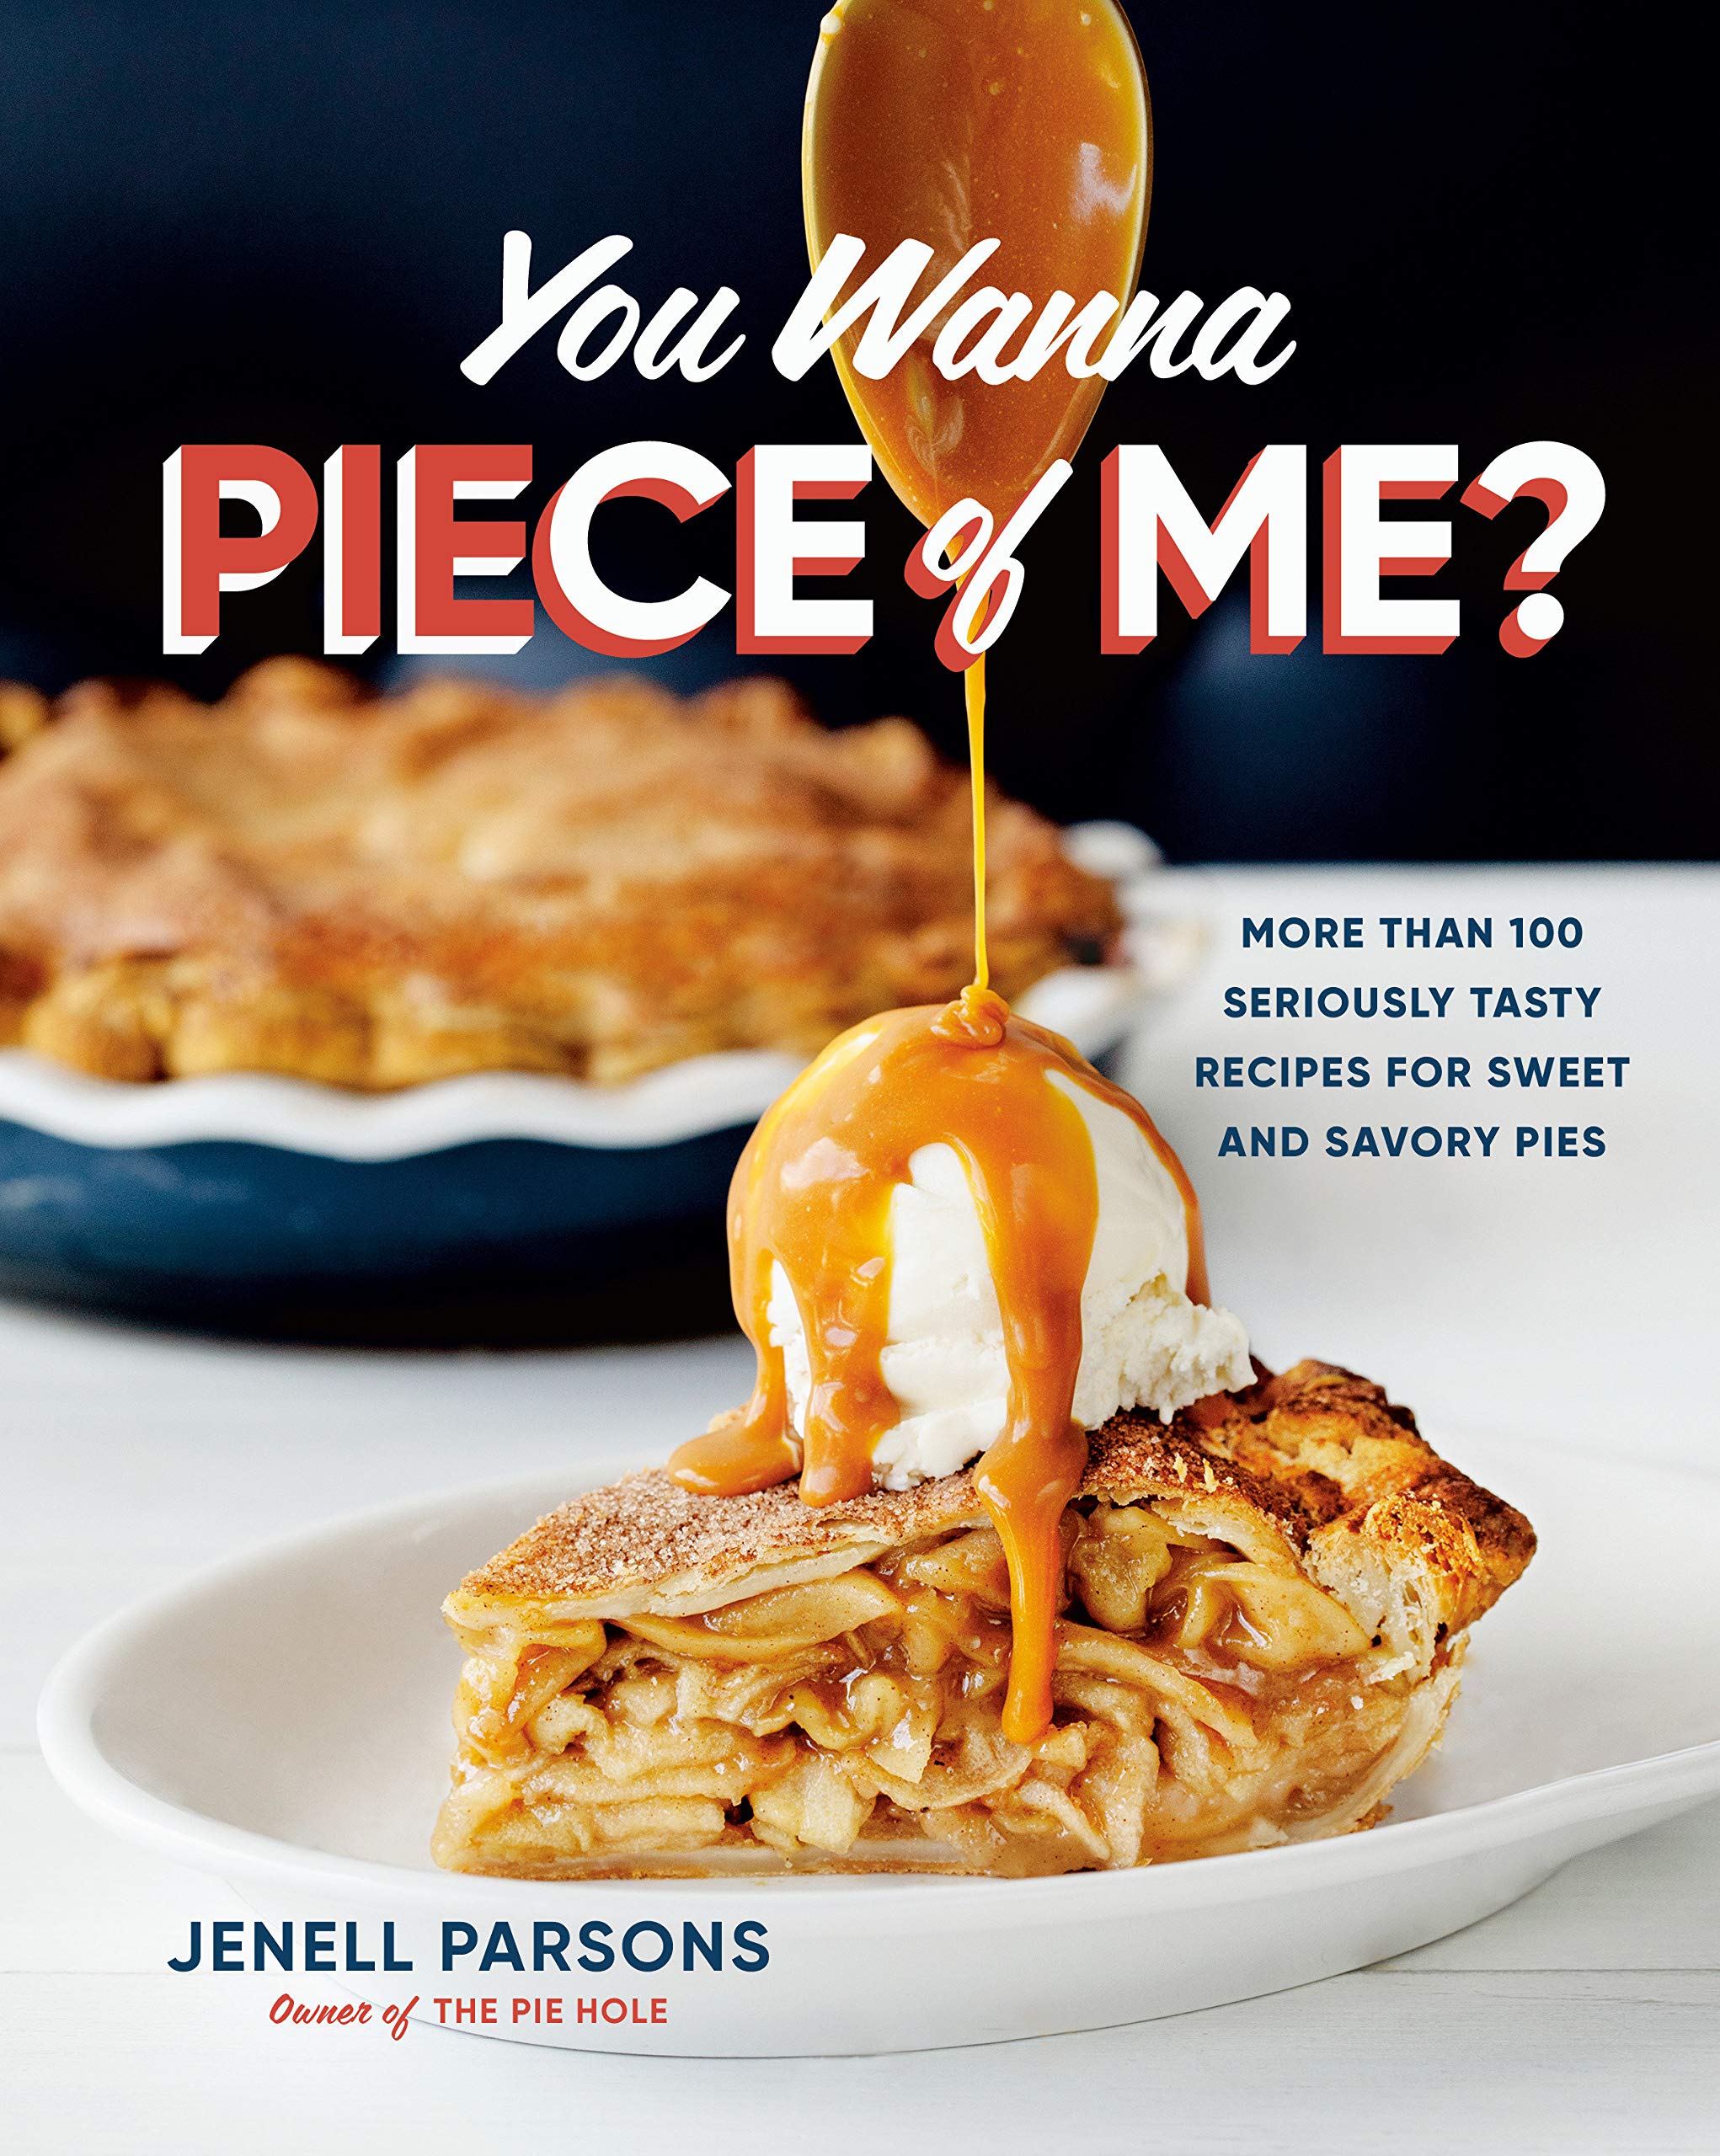 You Wanna Piece of Me? | Jenell Parsons